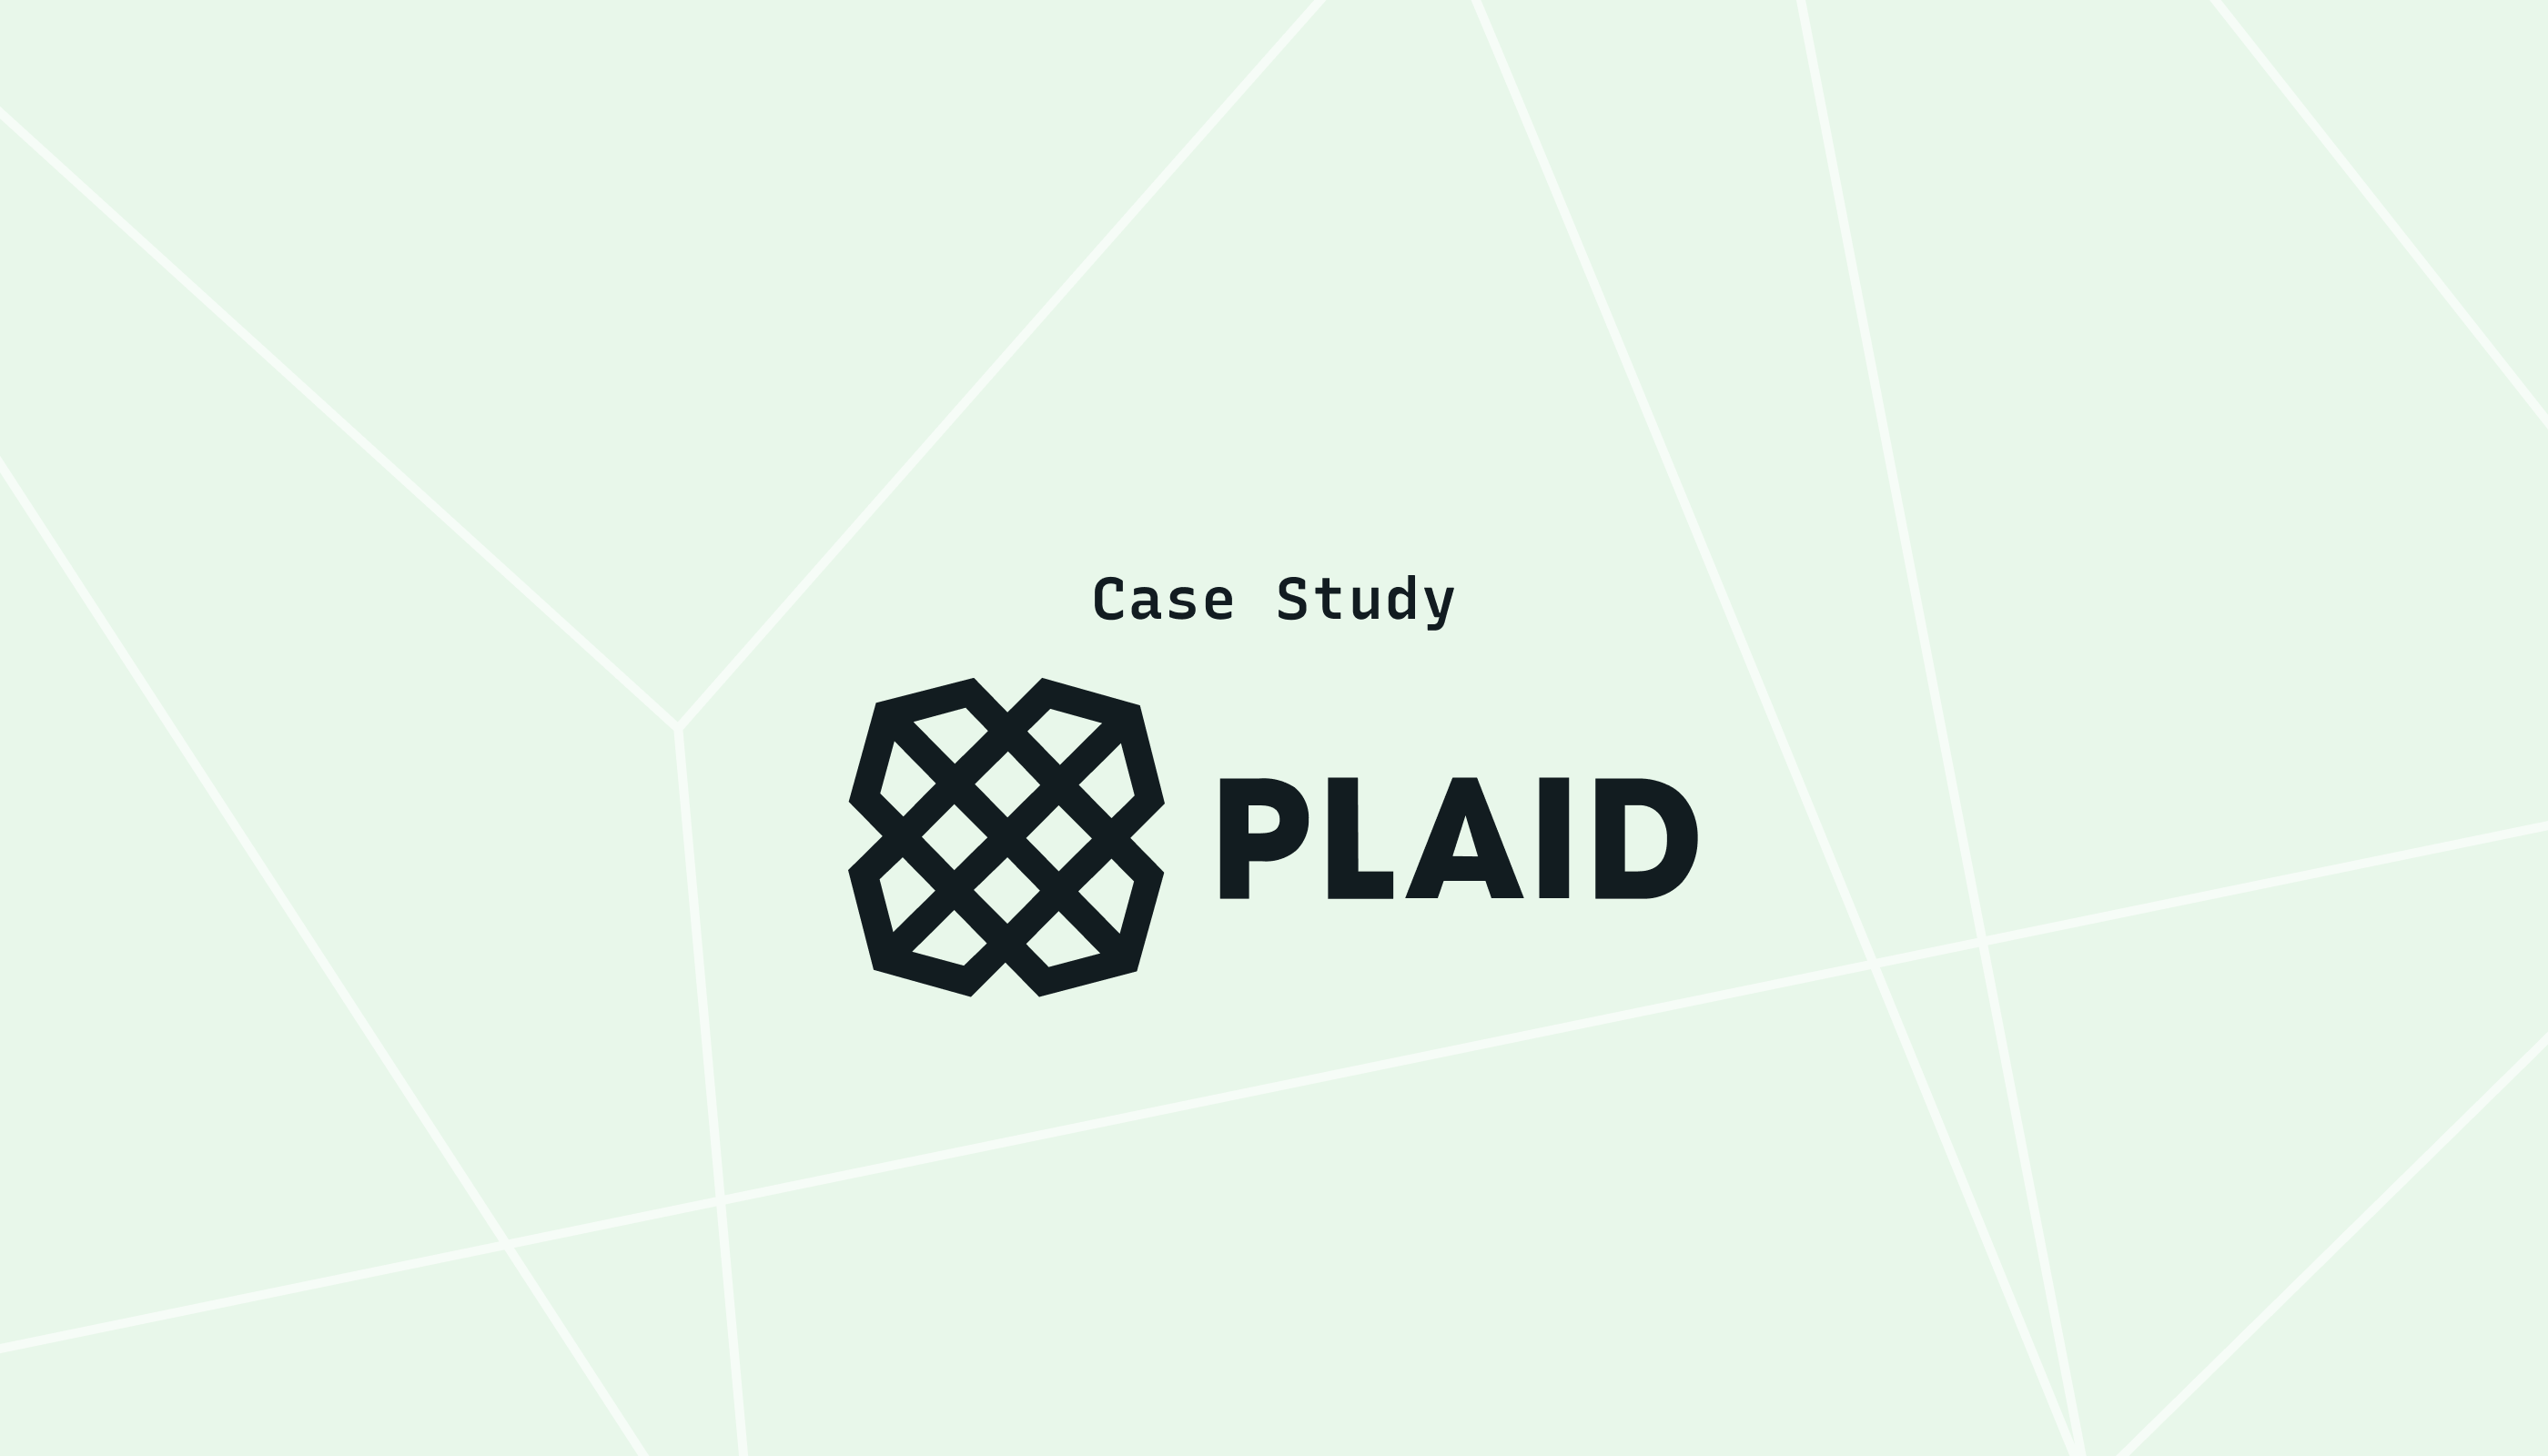 Plaid investigates CI/CD issues 20x faster with Lightstep